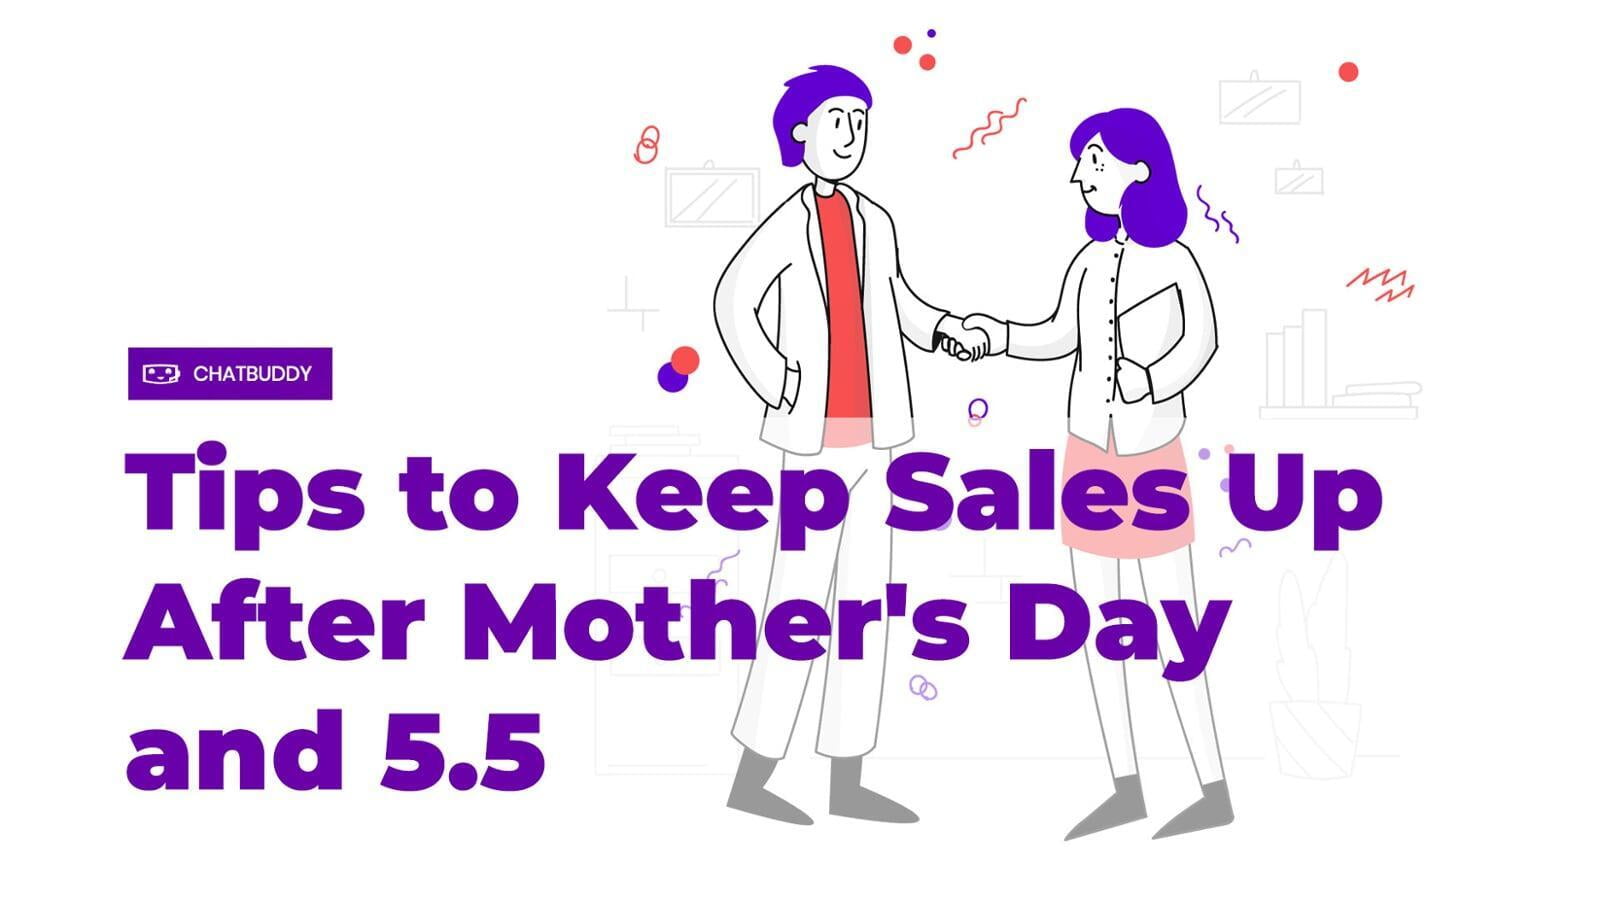 Tips to Keep Sales Up After Mother's Day and 5.5